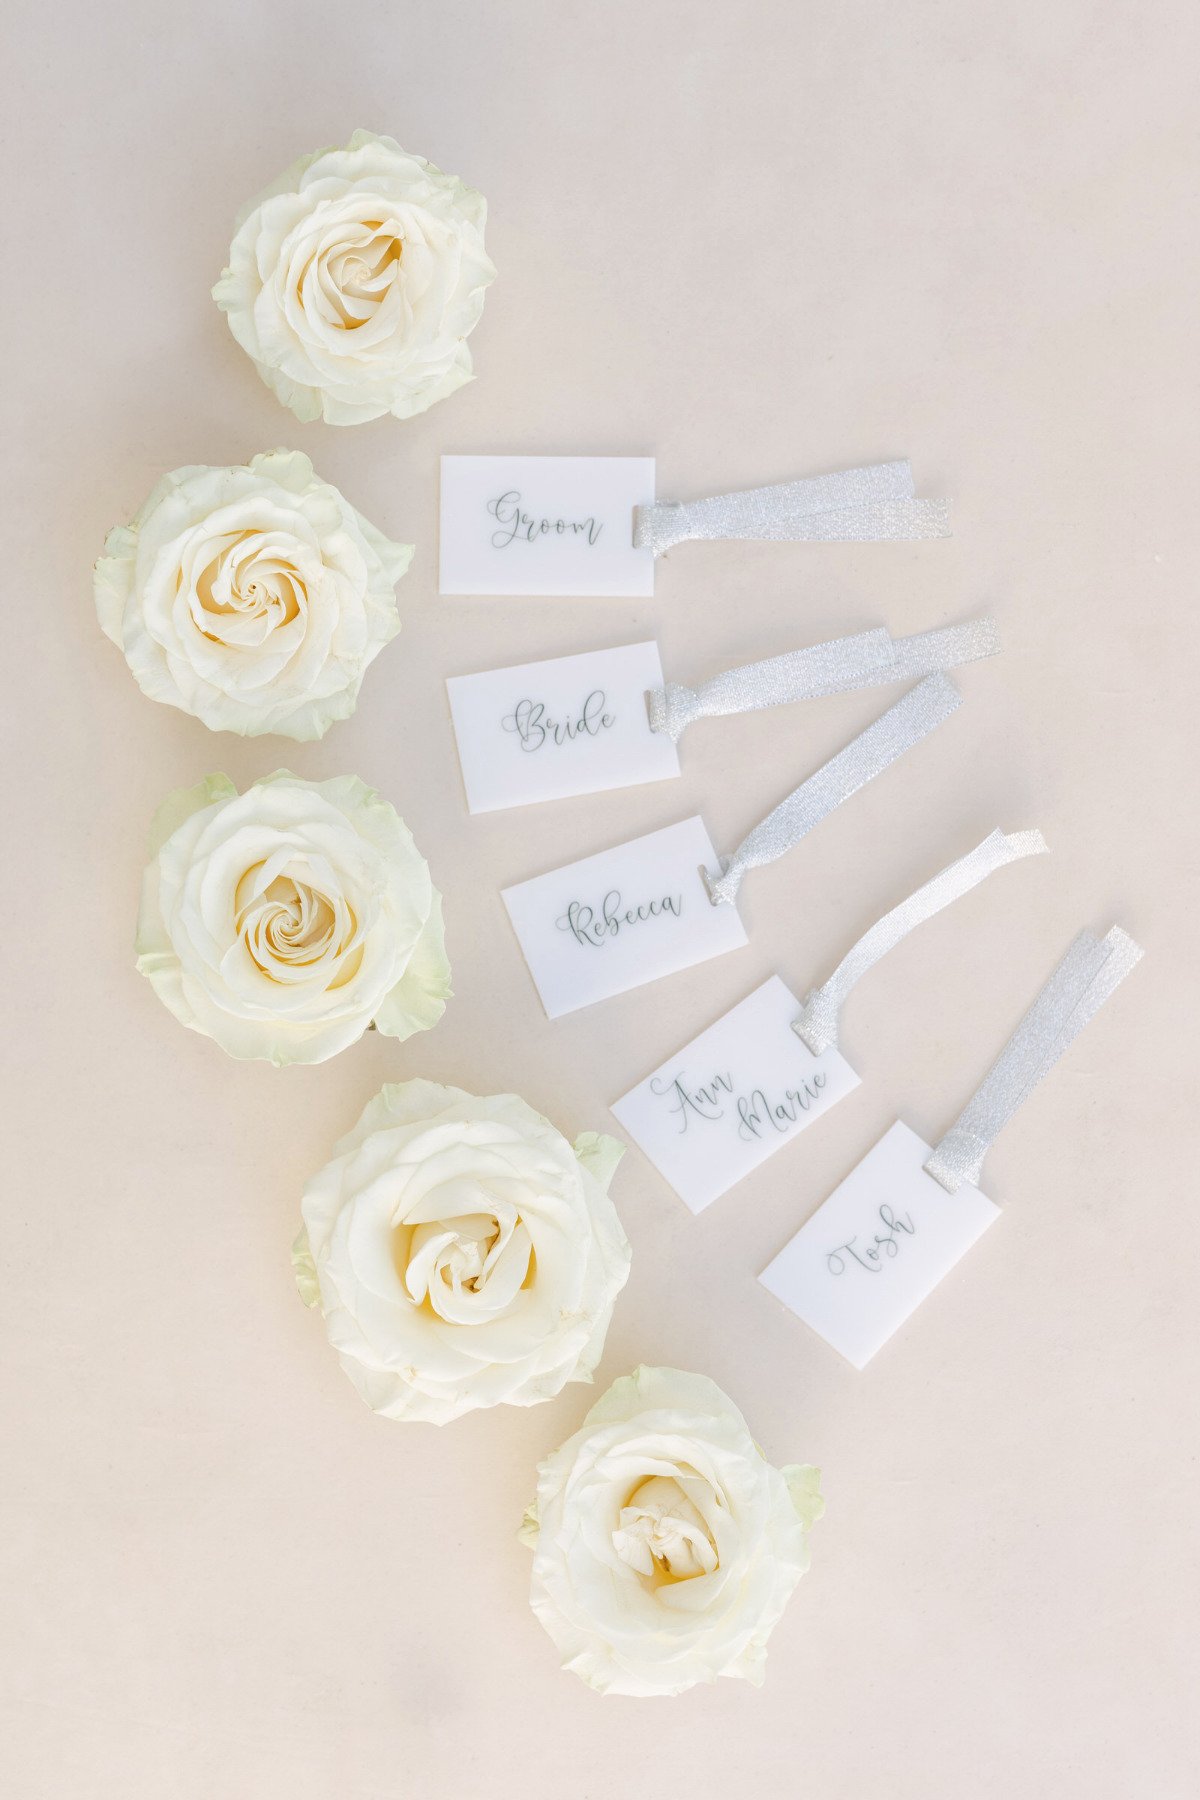 Wedding flowers with calligraphy